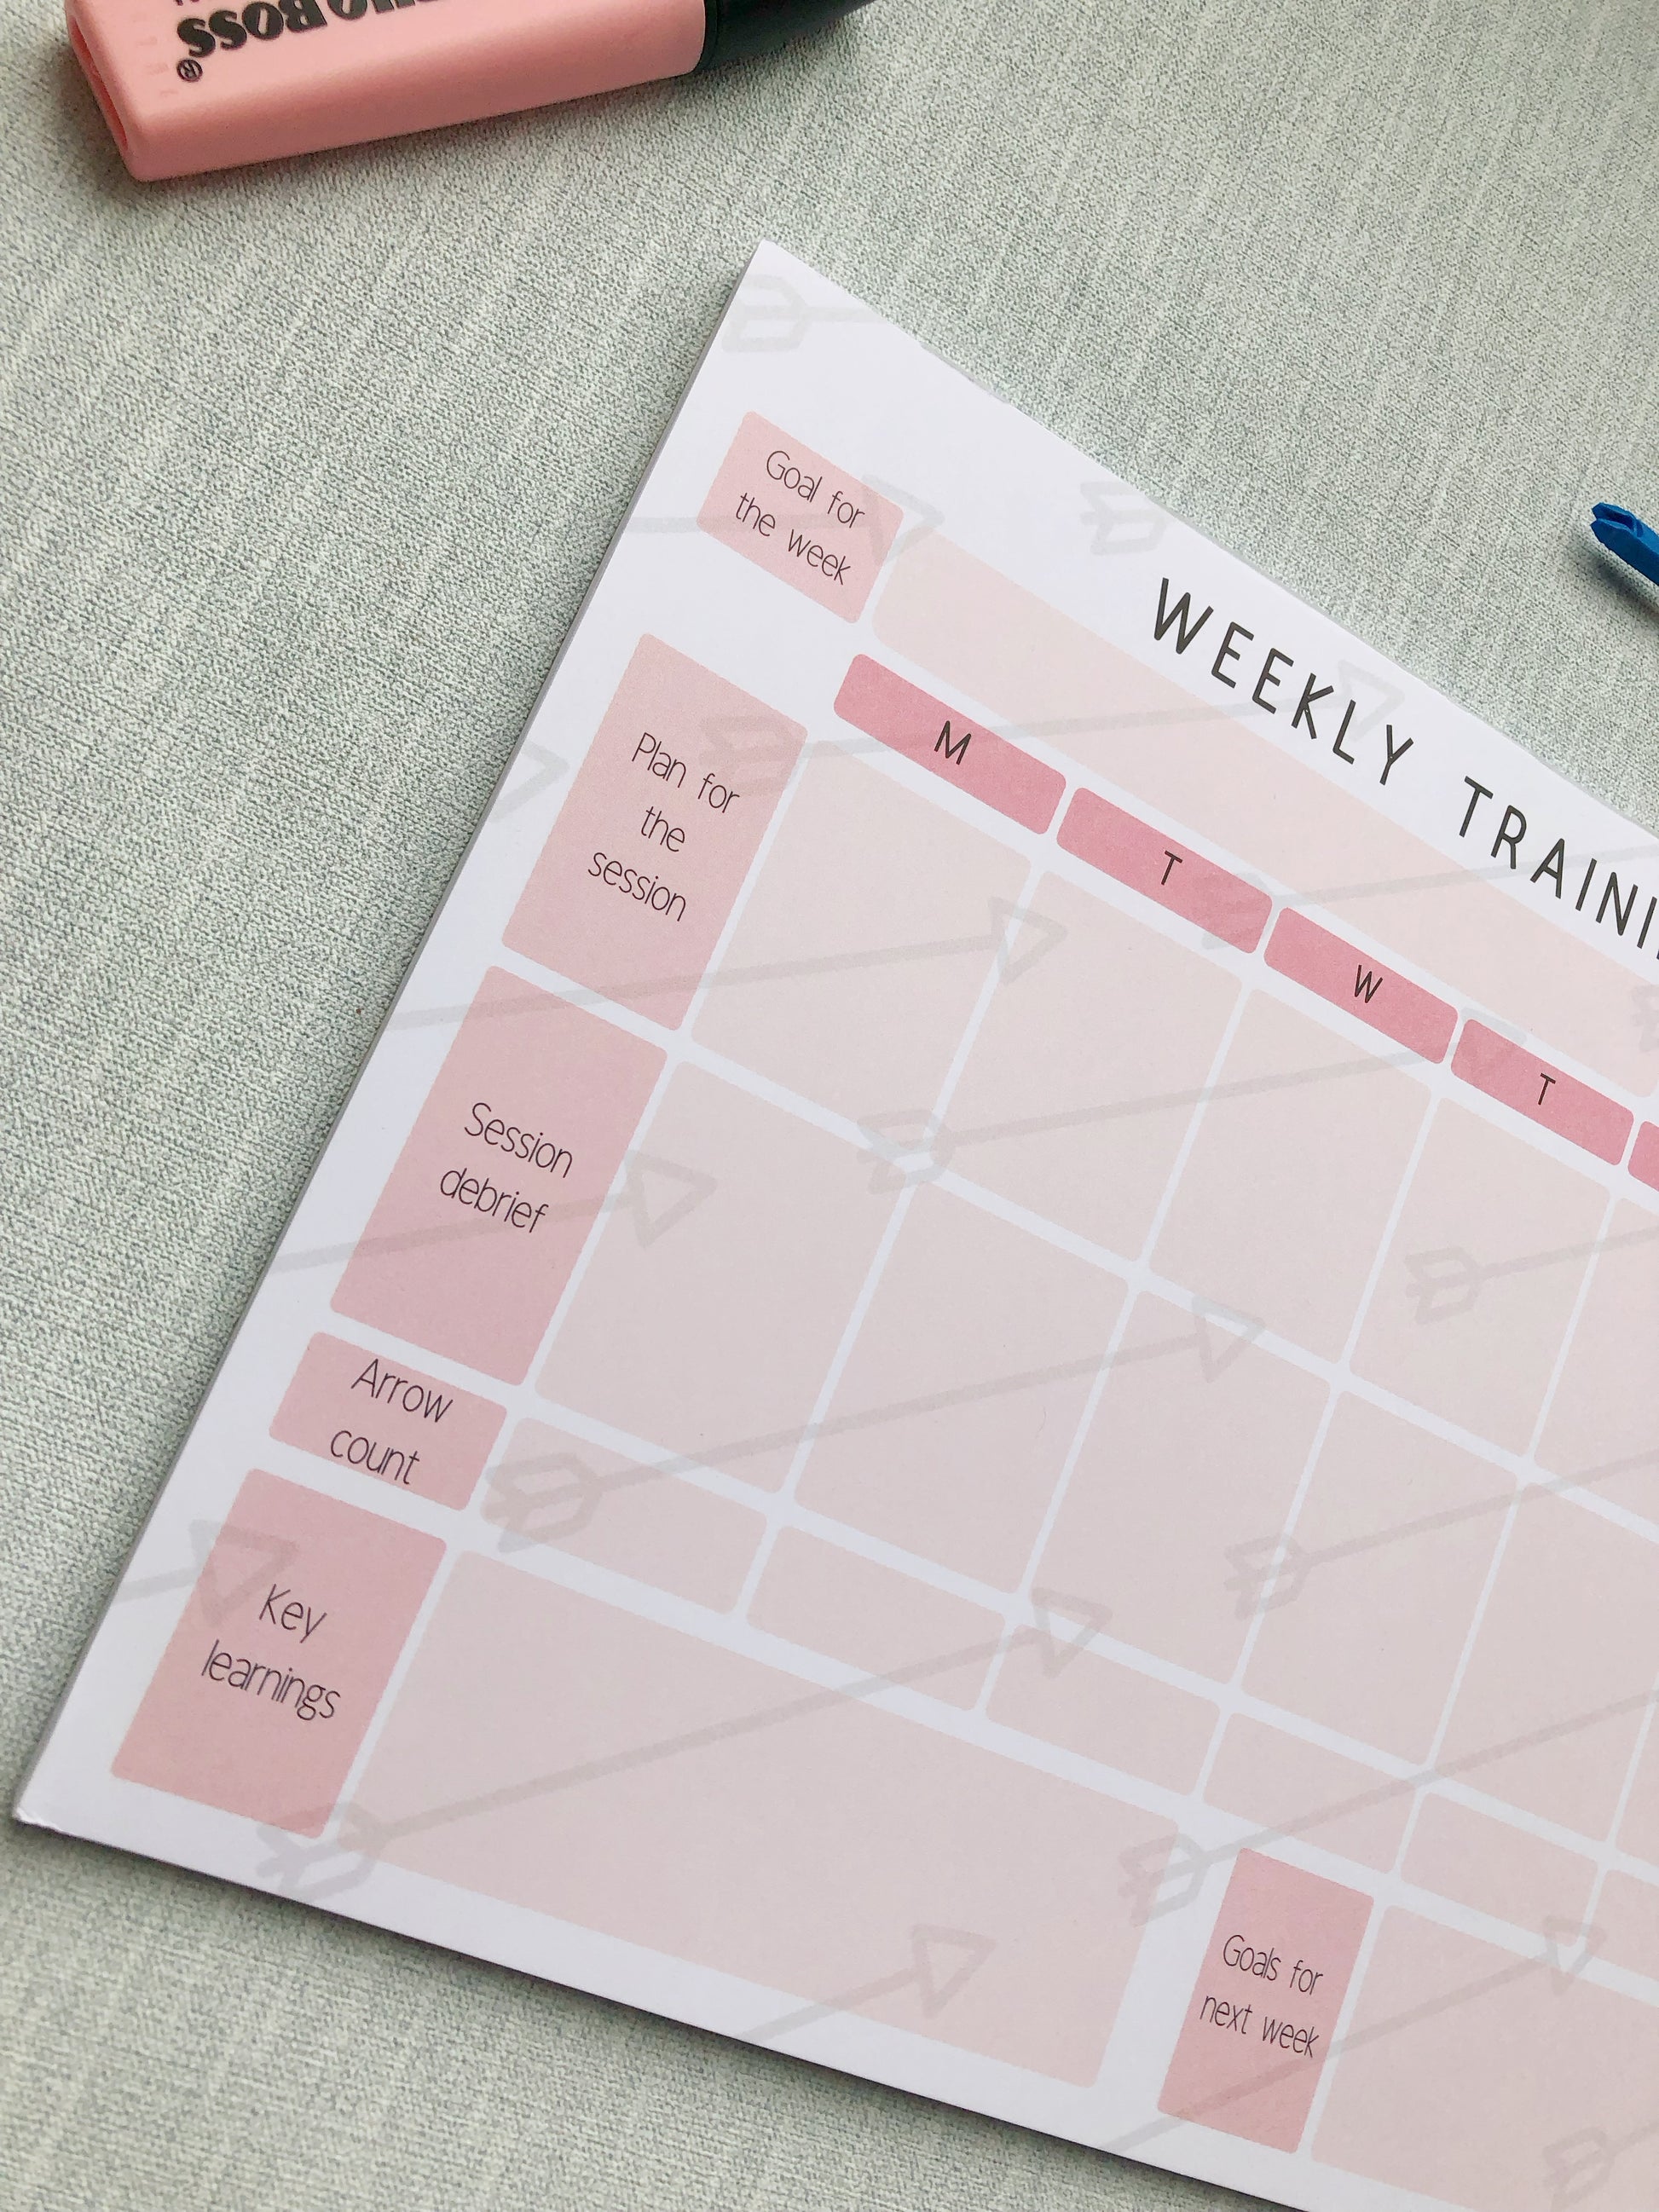 pink themed archery weekly planner. With different sections titled, goal for the week, plan for the session, session debrief, arrow count, key learnings, and goal for next week.